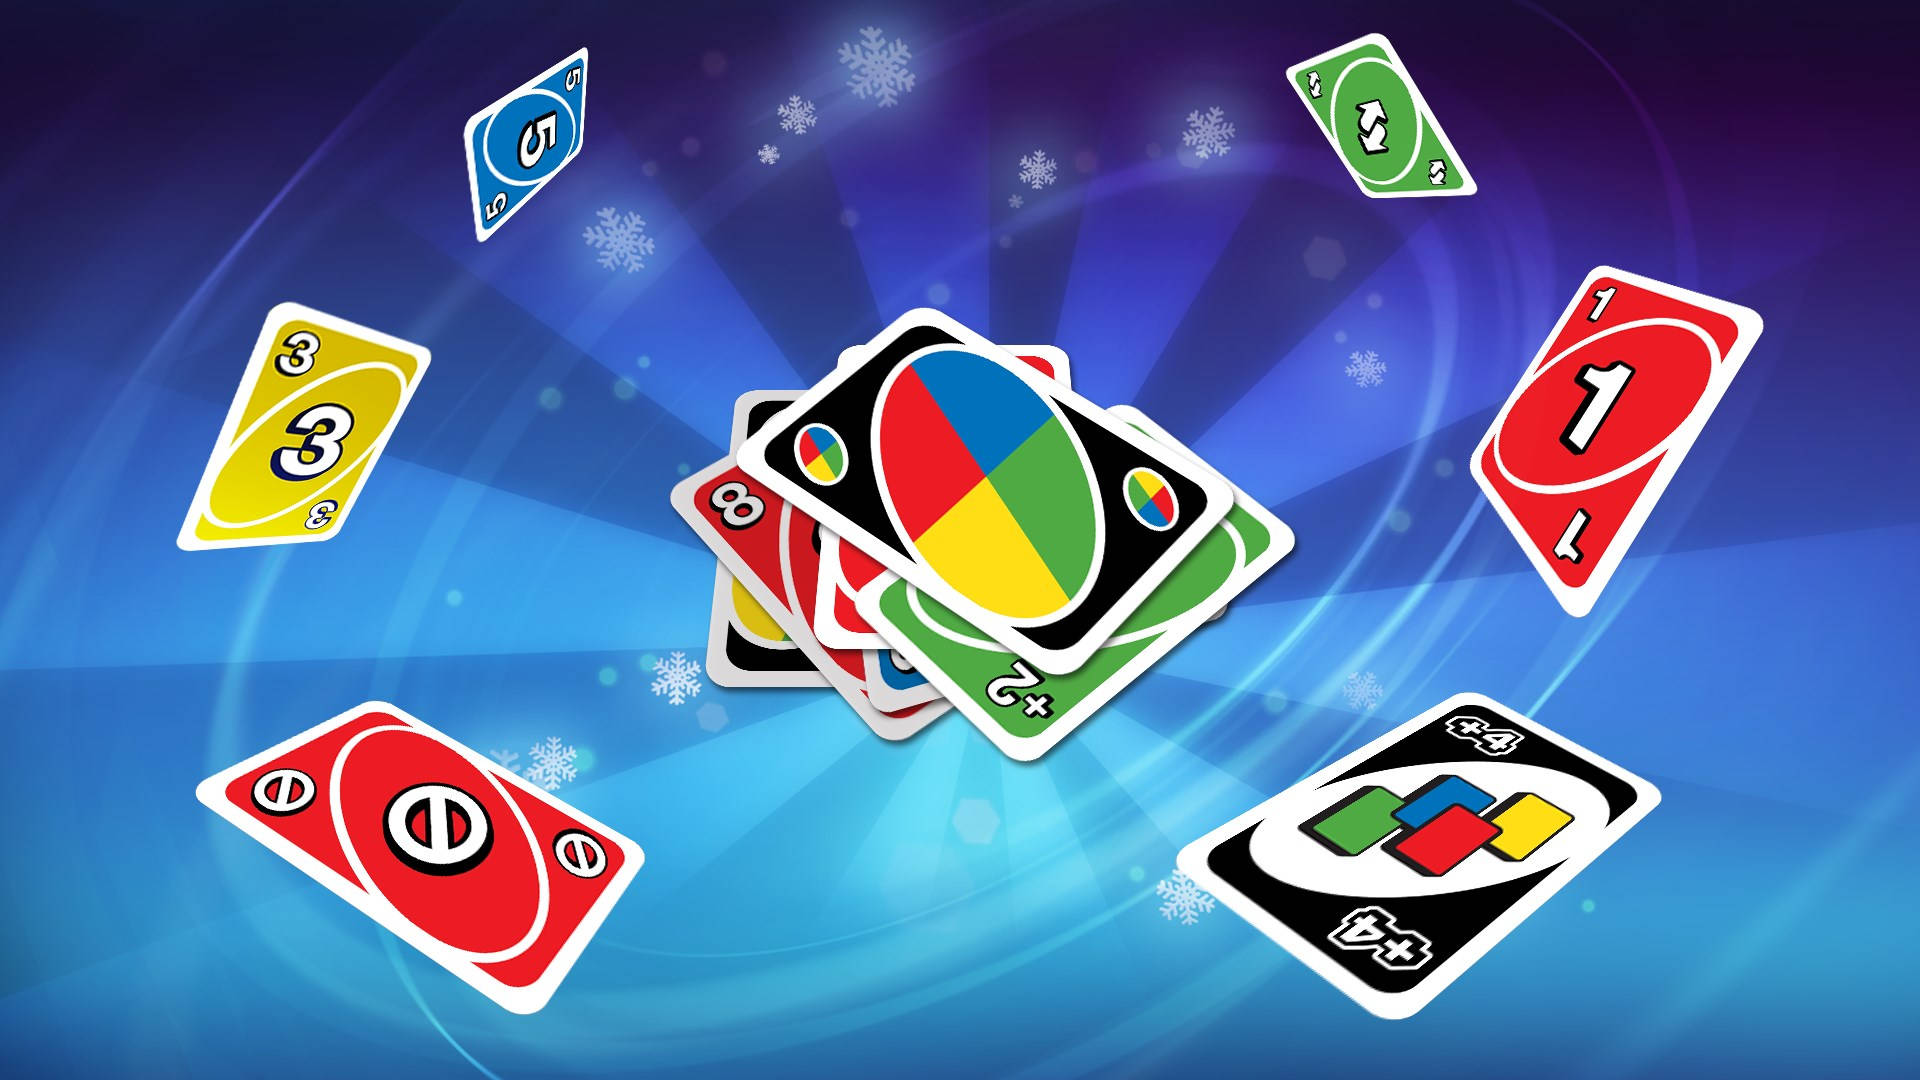 Flying Uno Cards Background